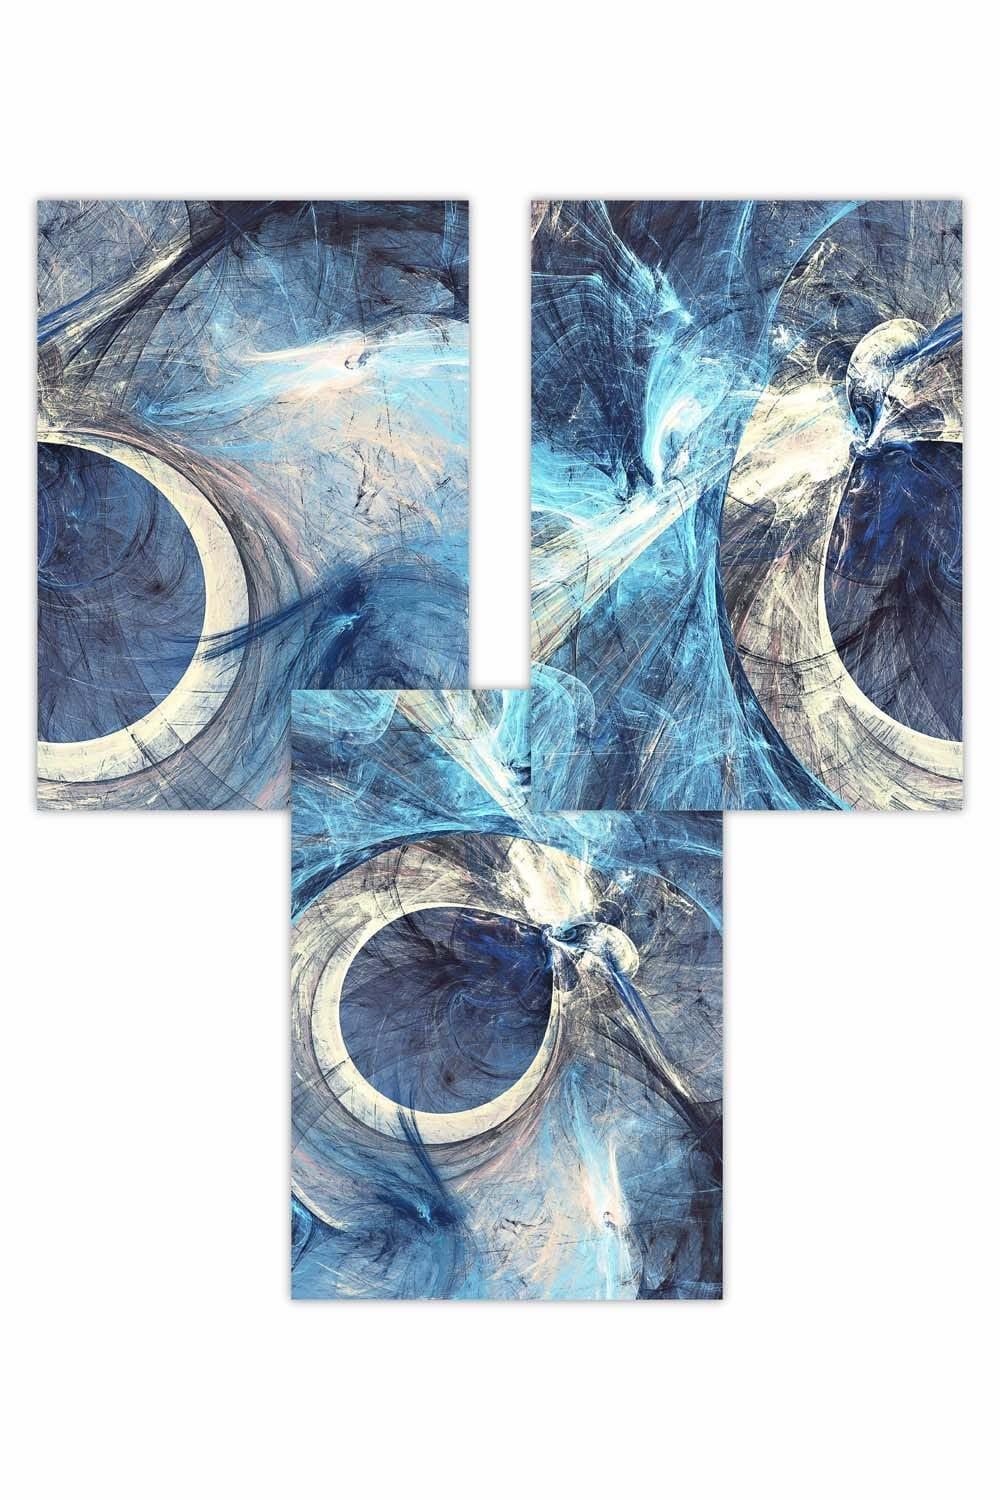 Set of 3 Abstract Blue and Cream Mixed Media Fractal Art Posters